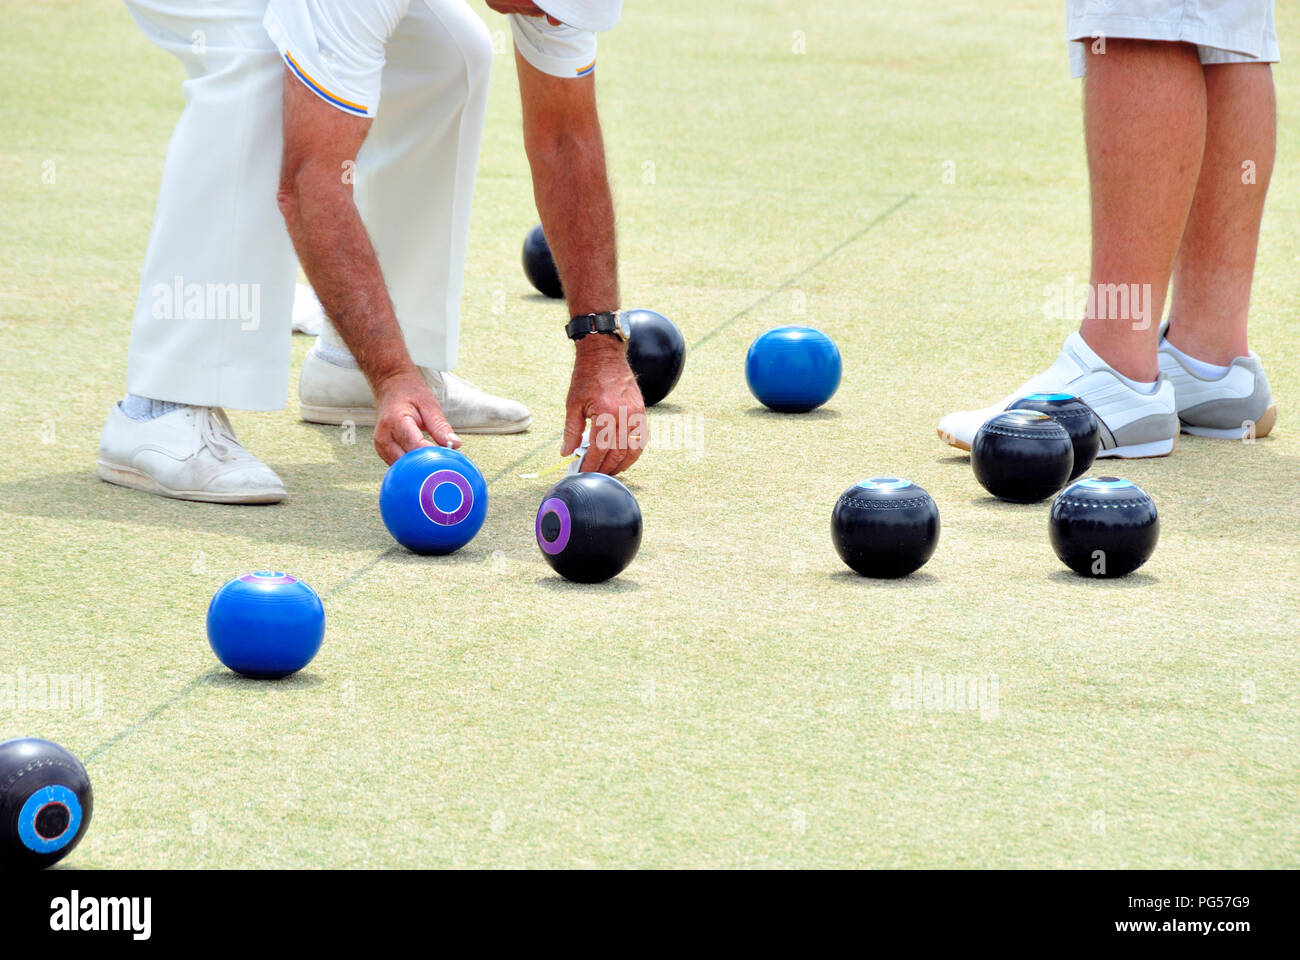 WUDINNA, AUSTRALIA-  FEBRUARY 02, 2018: Playing bowls. People bowling on a bowling green in Australia Stock Photo